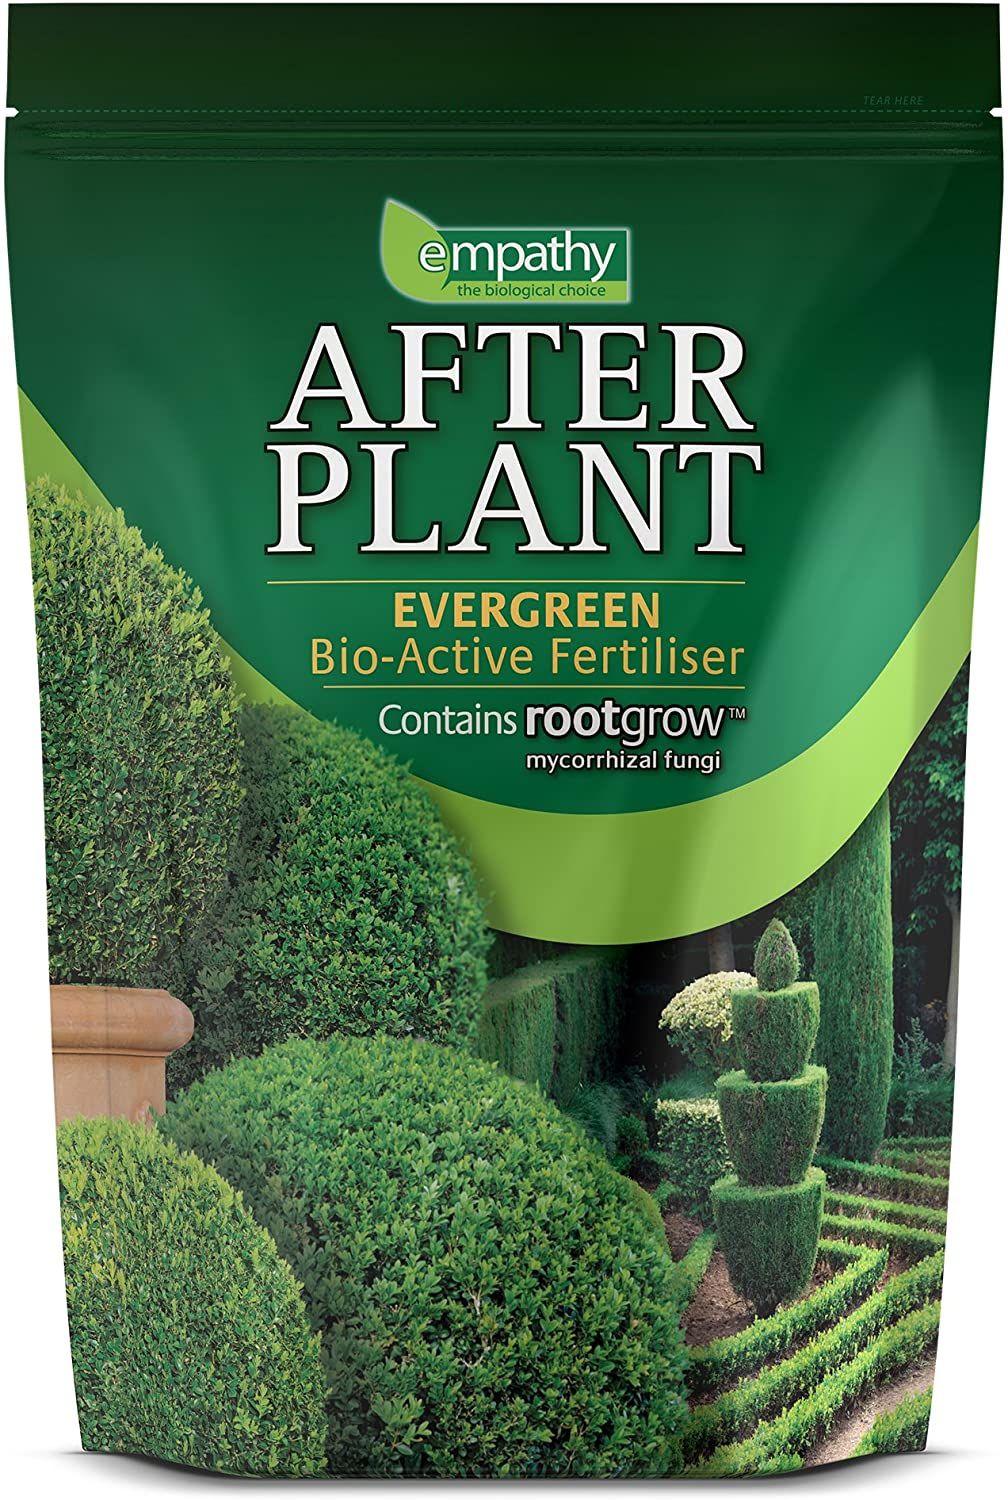 EMPATHY AFTERPLANT EVERGREEN with rootgrow 1KG